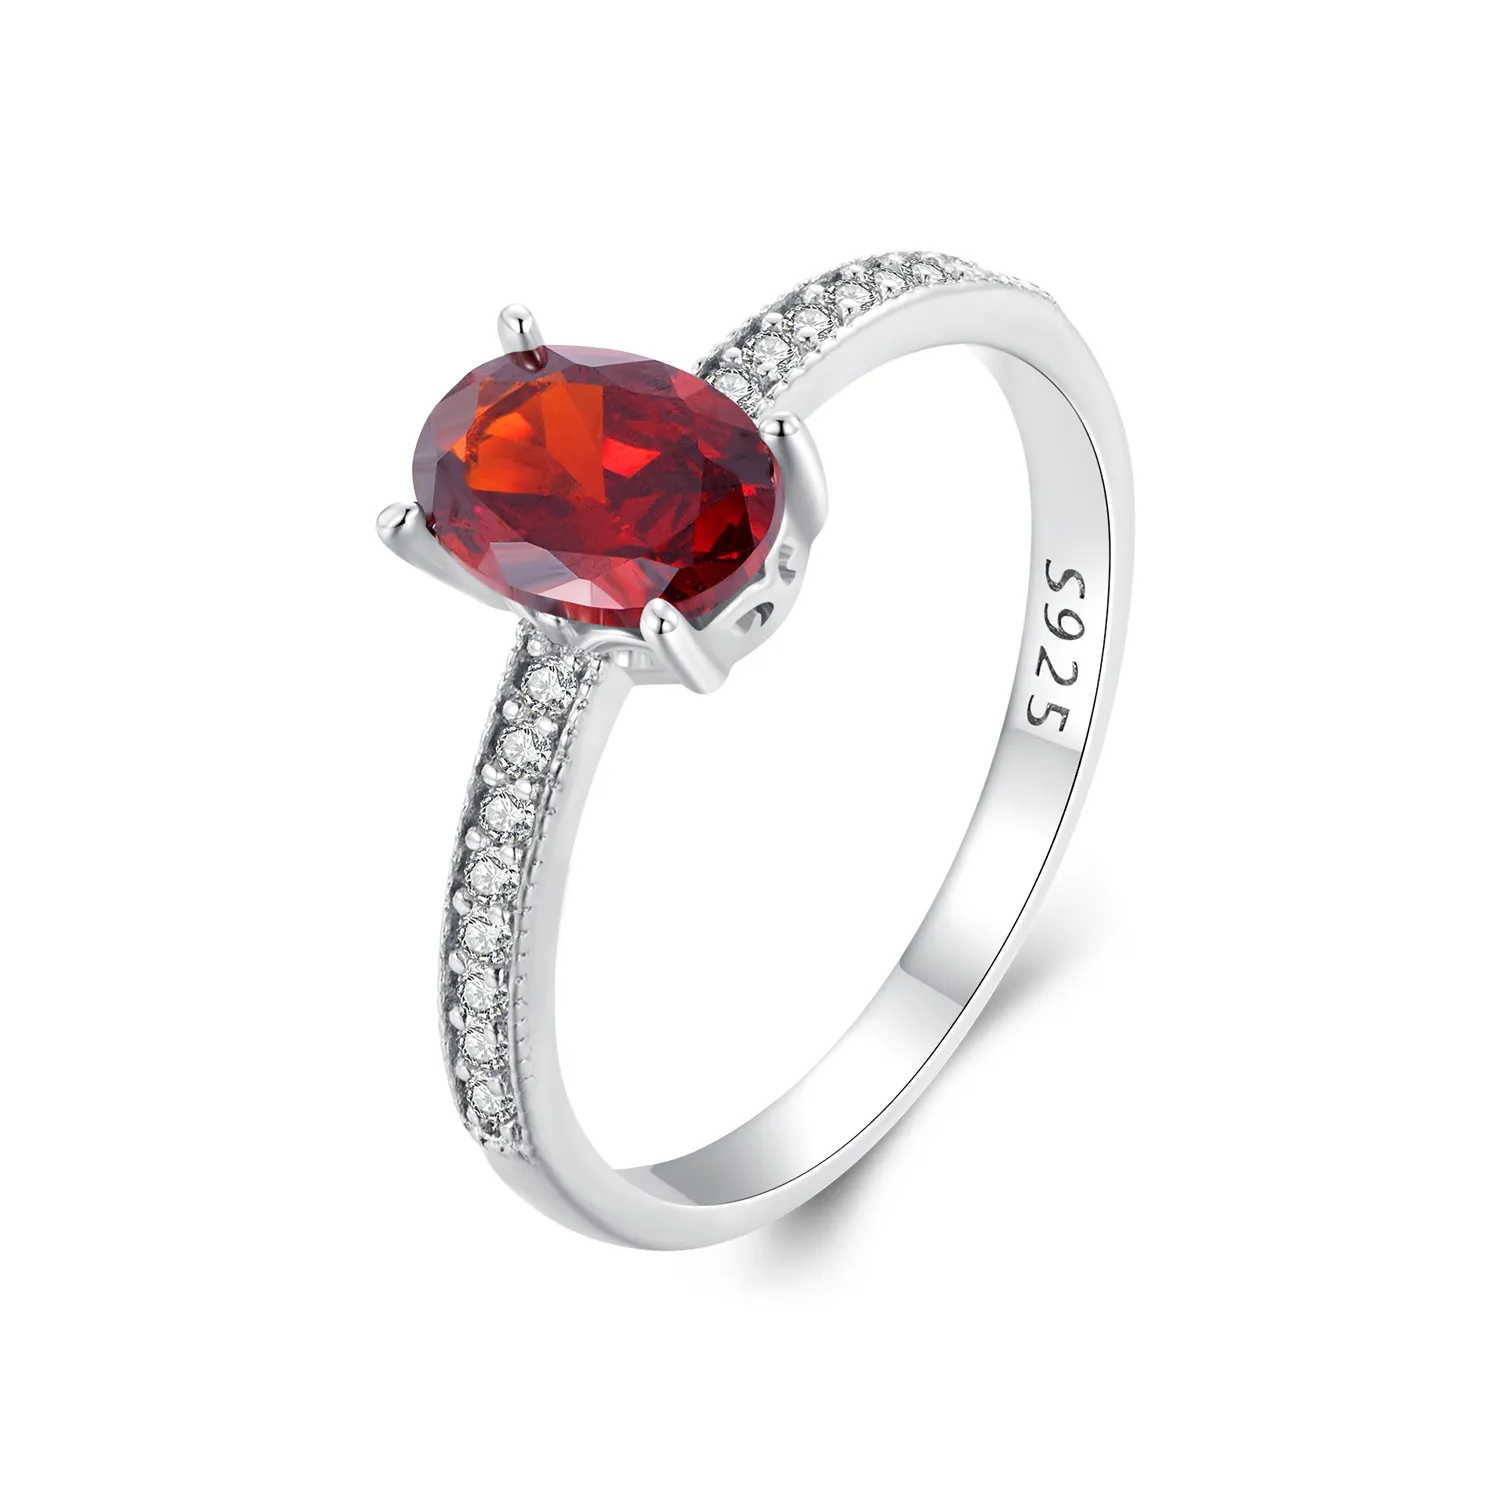 Pandora Style Red Ring - BSR460-RD